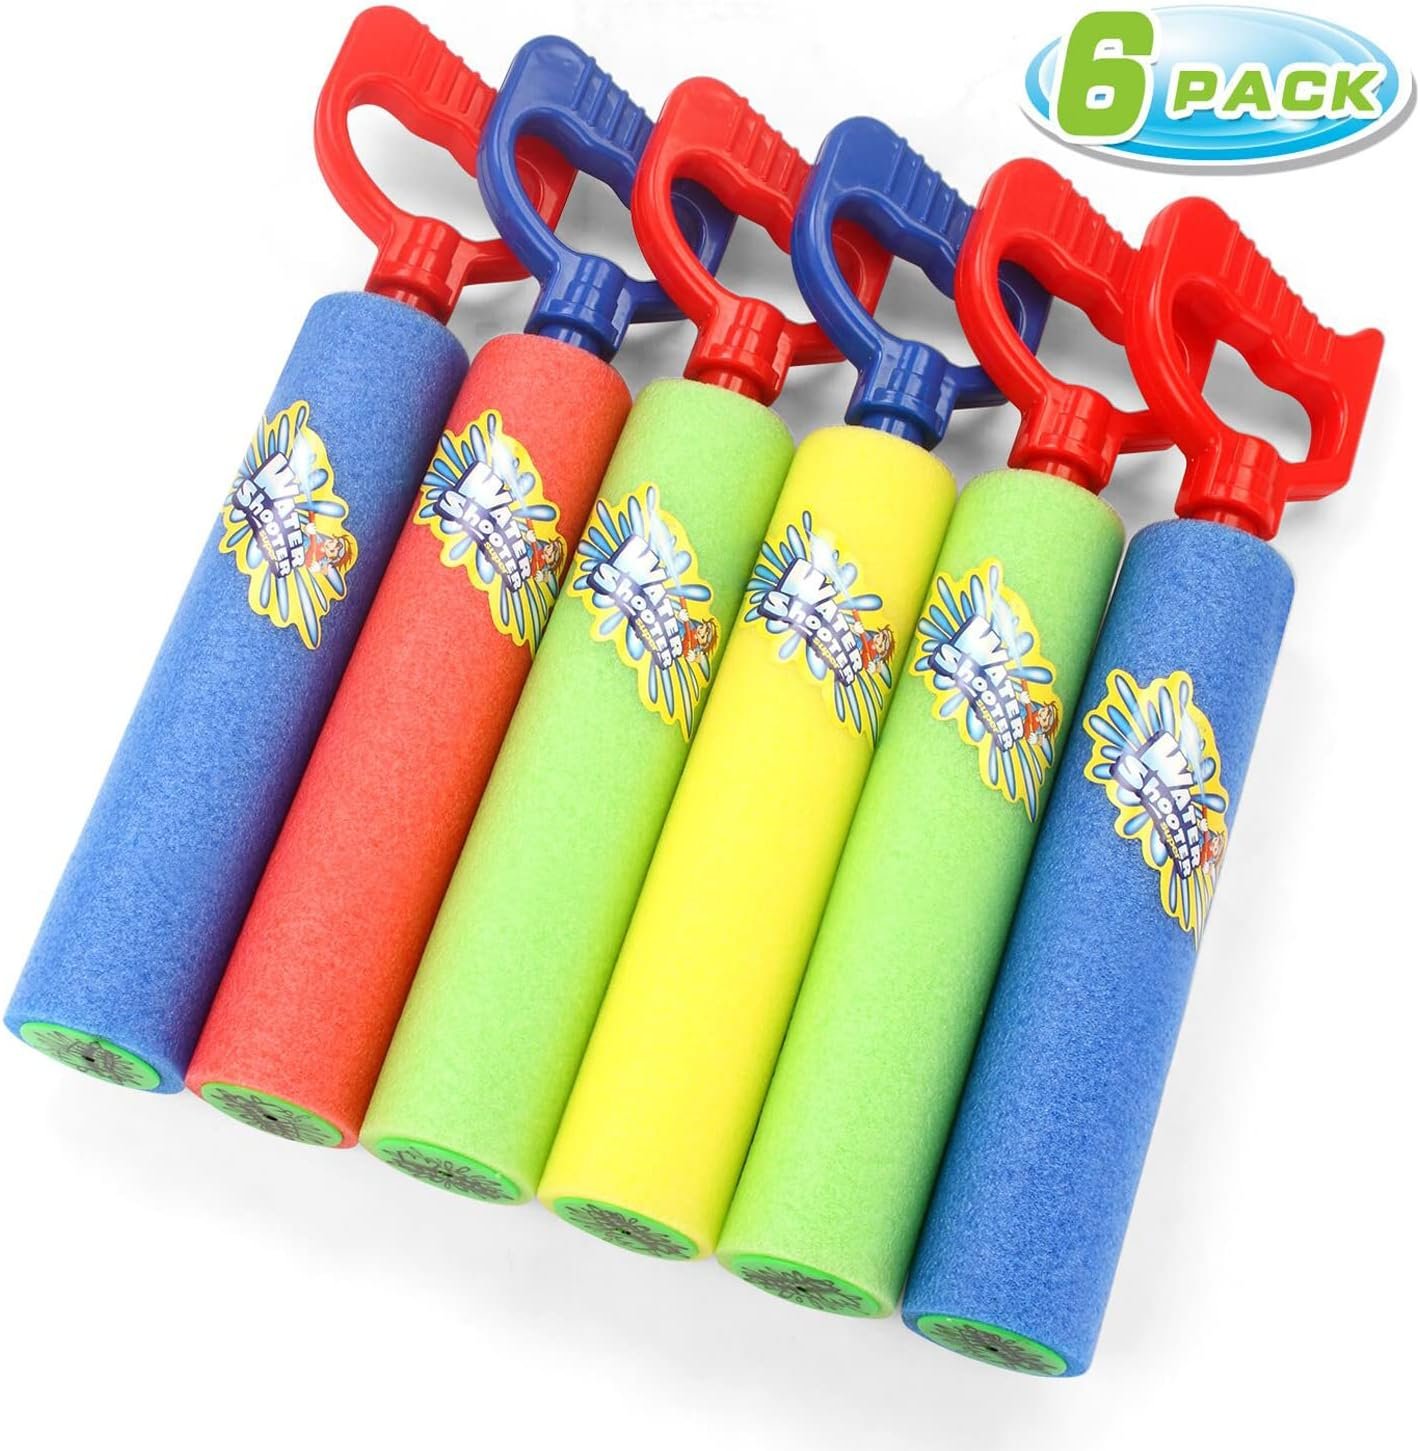 Water Guns Shooter 6 Pack, Super Foam Soakers Blaster Squirt Guns, Pool Noodles Toy with Plastic Handle Summer Swimming Beach Garden Fighting Game,Outdoor Toys for Kids Boys Girls Adults